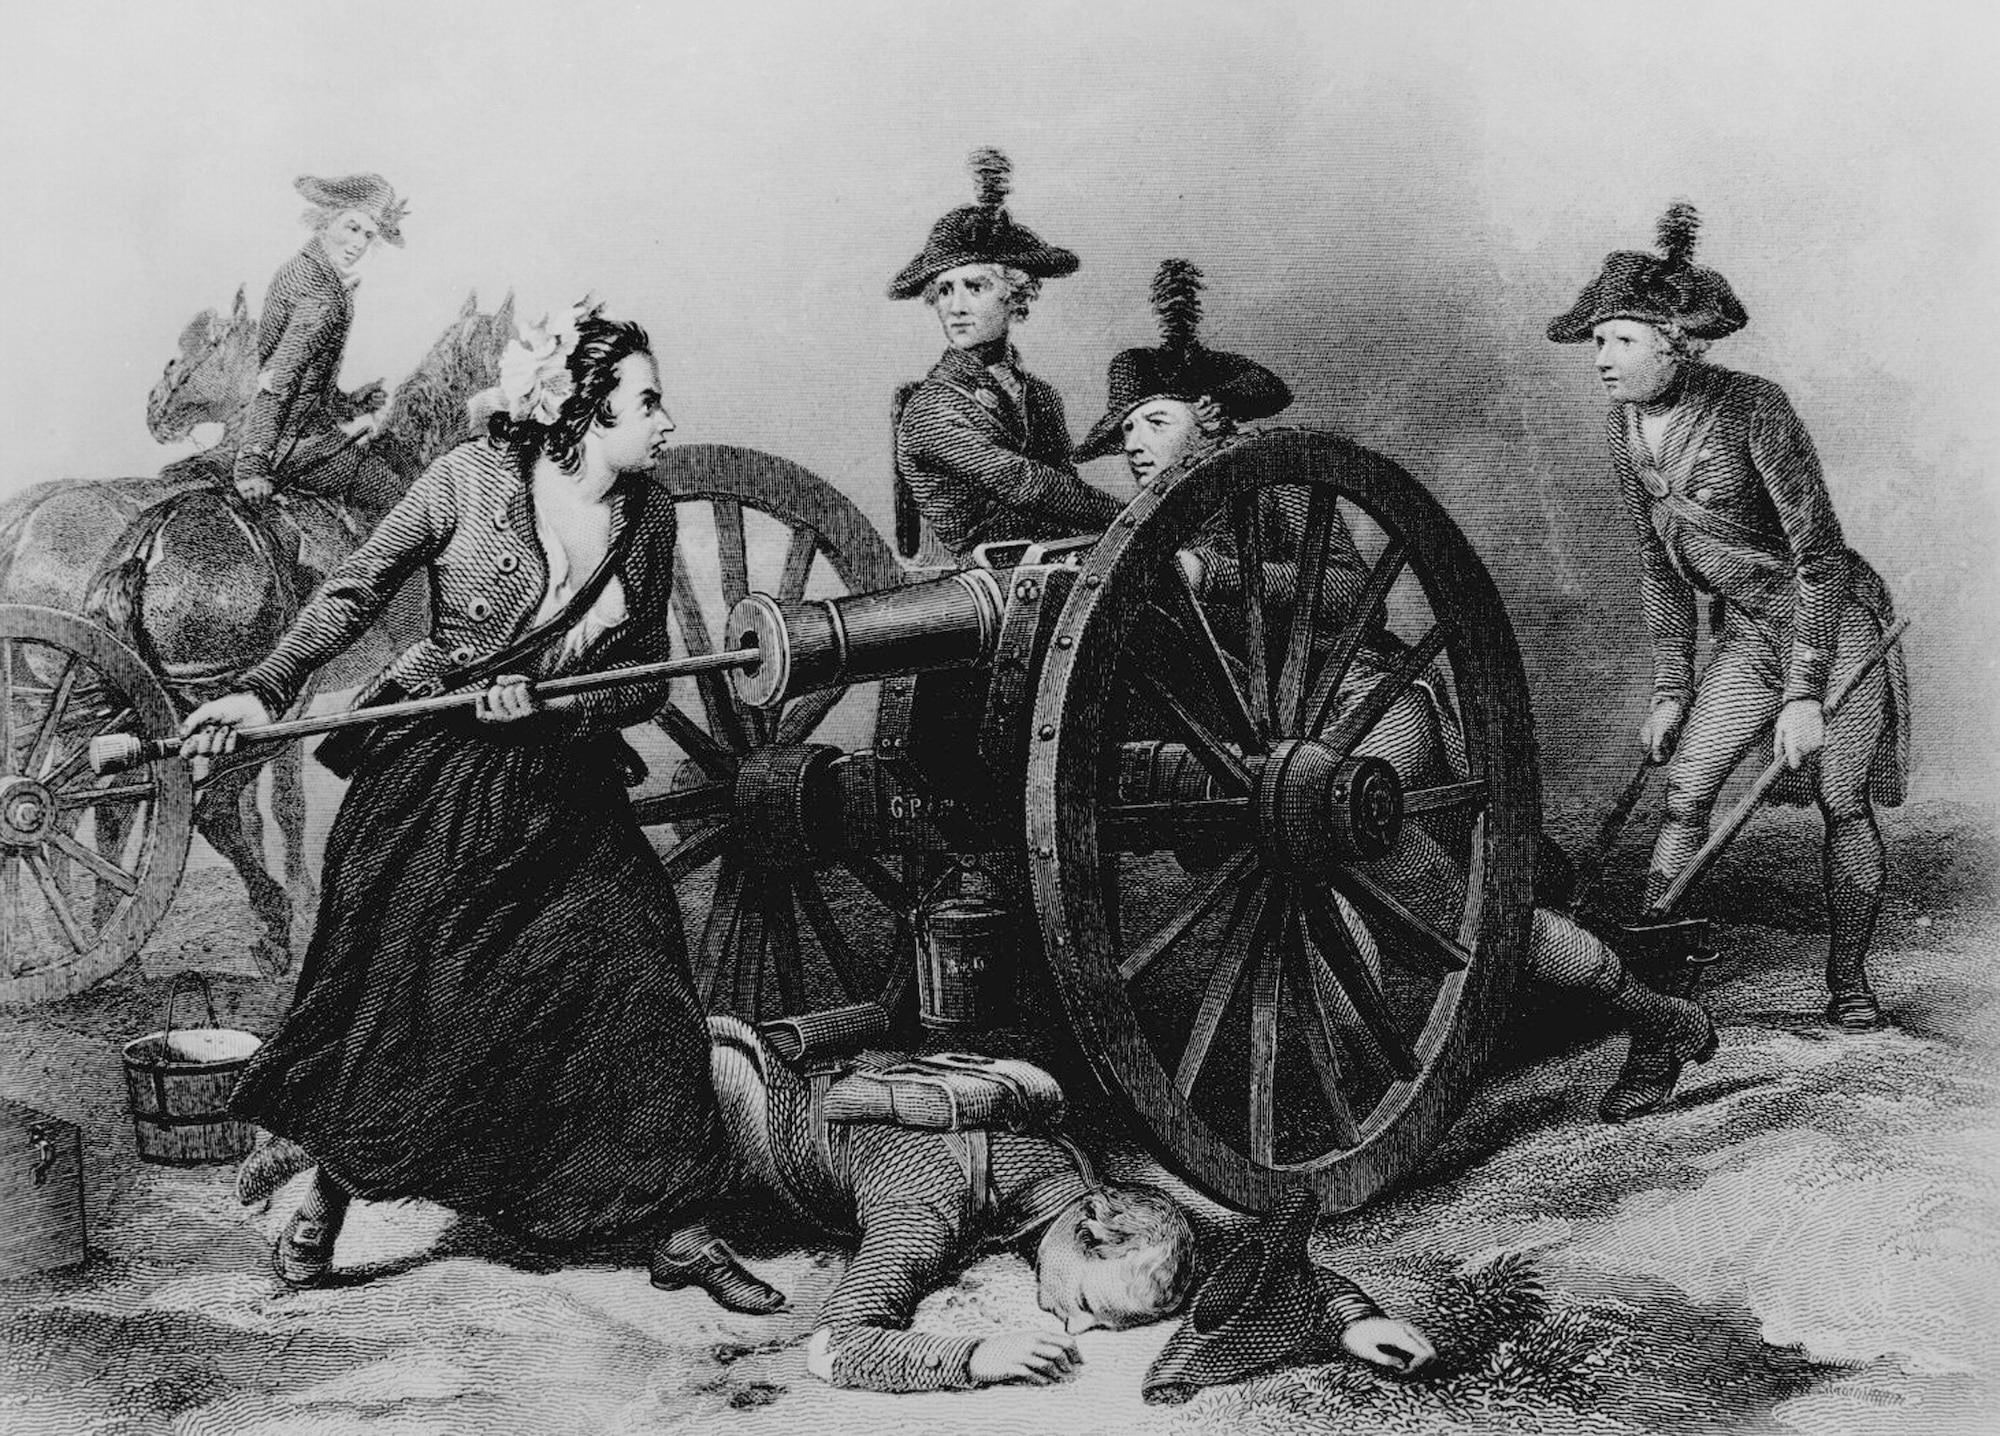 This engraving shows Mary Ludwig Hays McCauley, known as “Molly Pitcher,” the legendary heroine of the American Revolution, who is said to have participated in the Battle of Monmouth on June 28, 1778. (Courtesy of the National Archives)